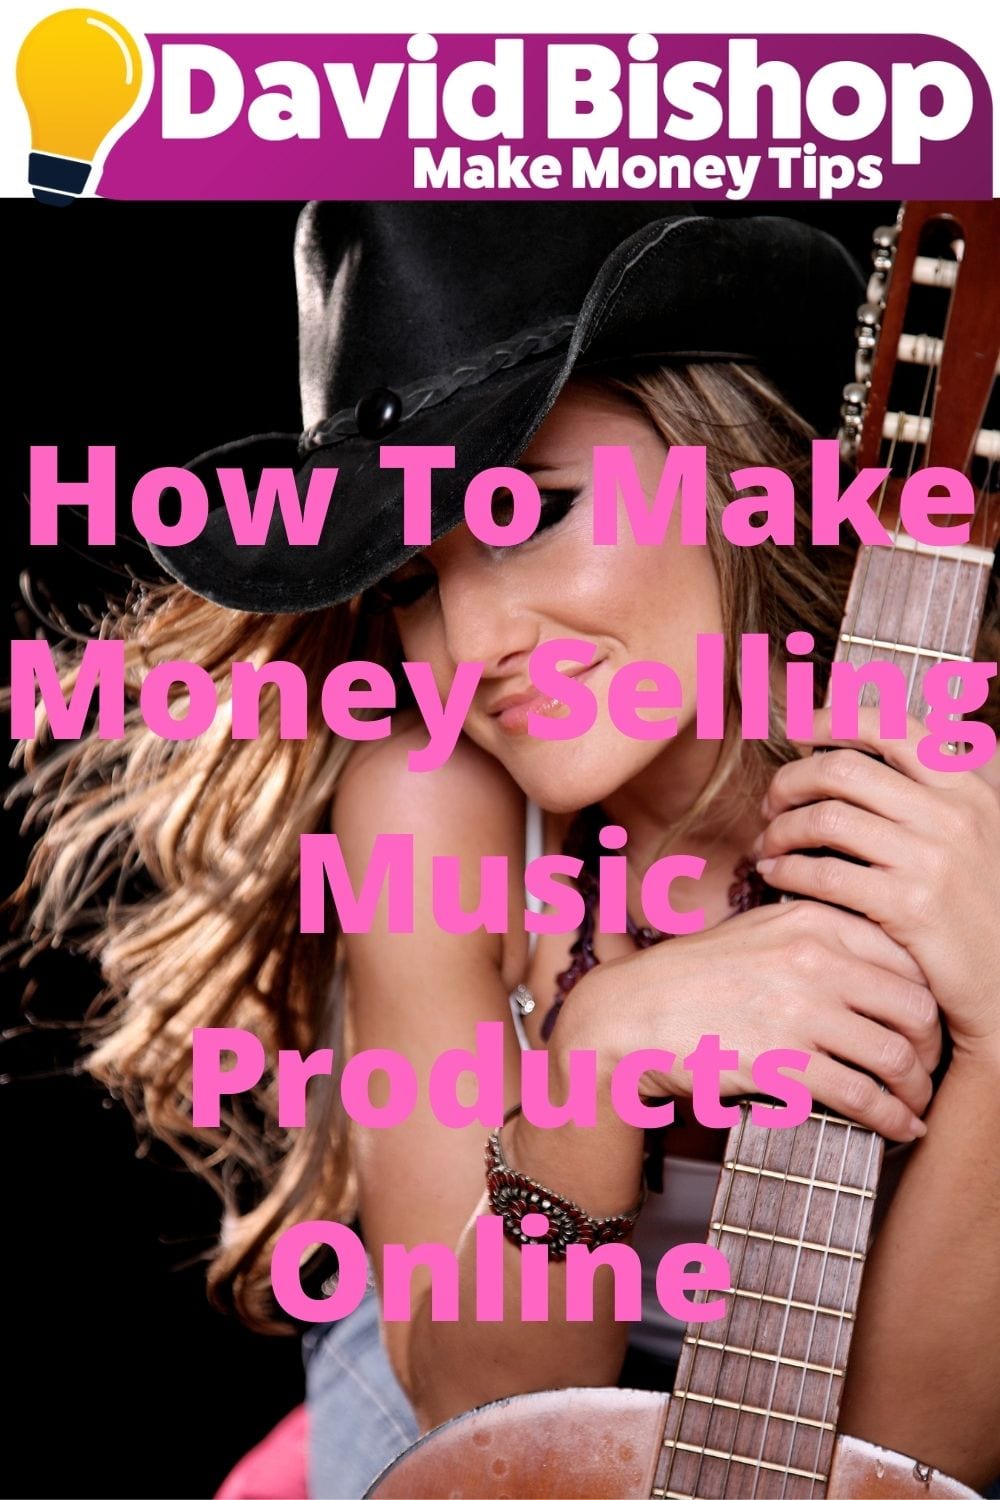 How To Make Money Selling Music Products Online